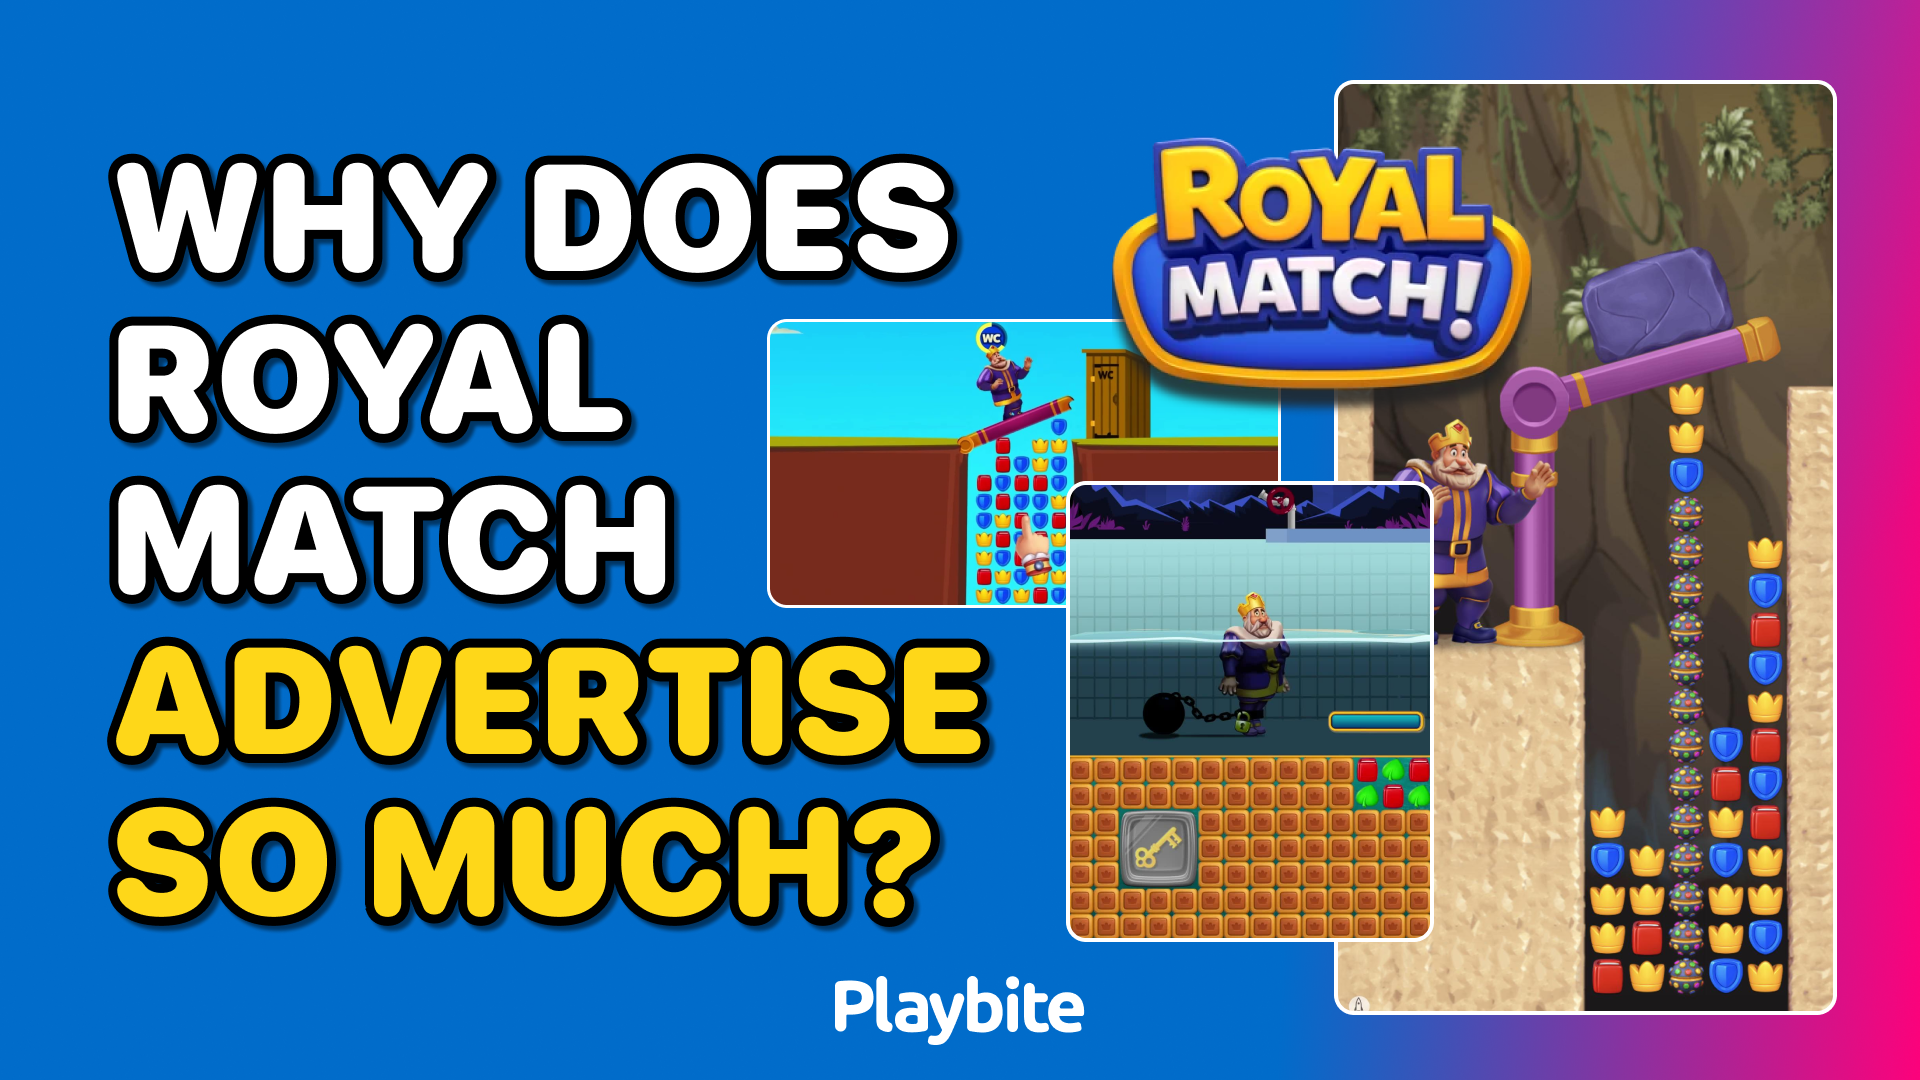 Why Does Royal Match Advertise So Much?